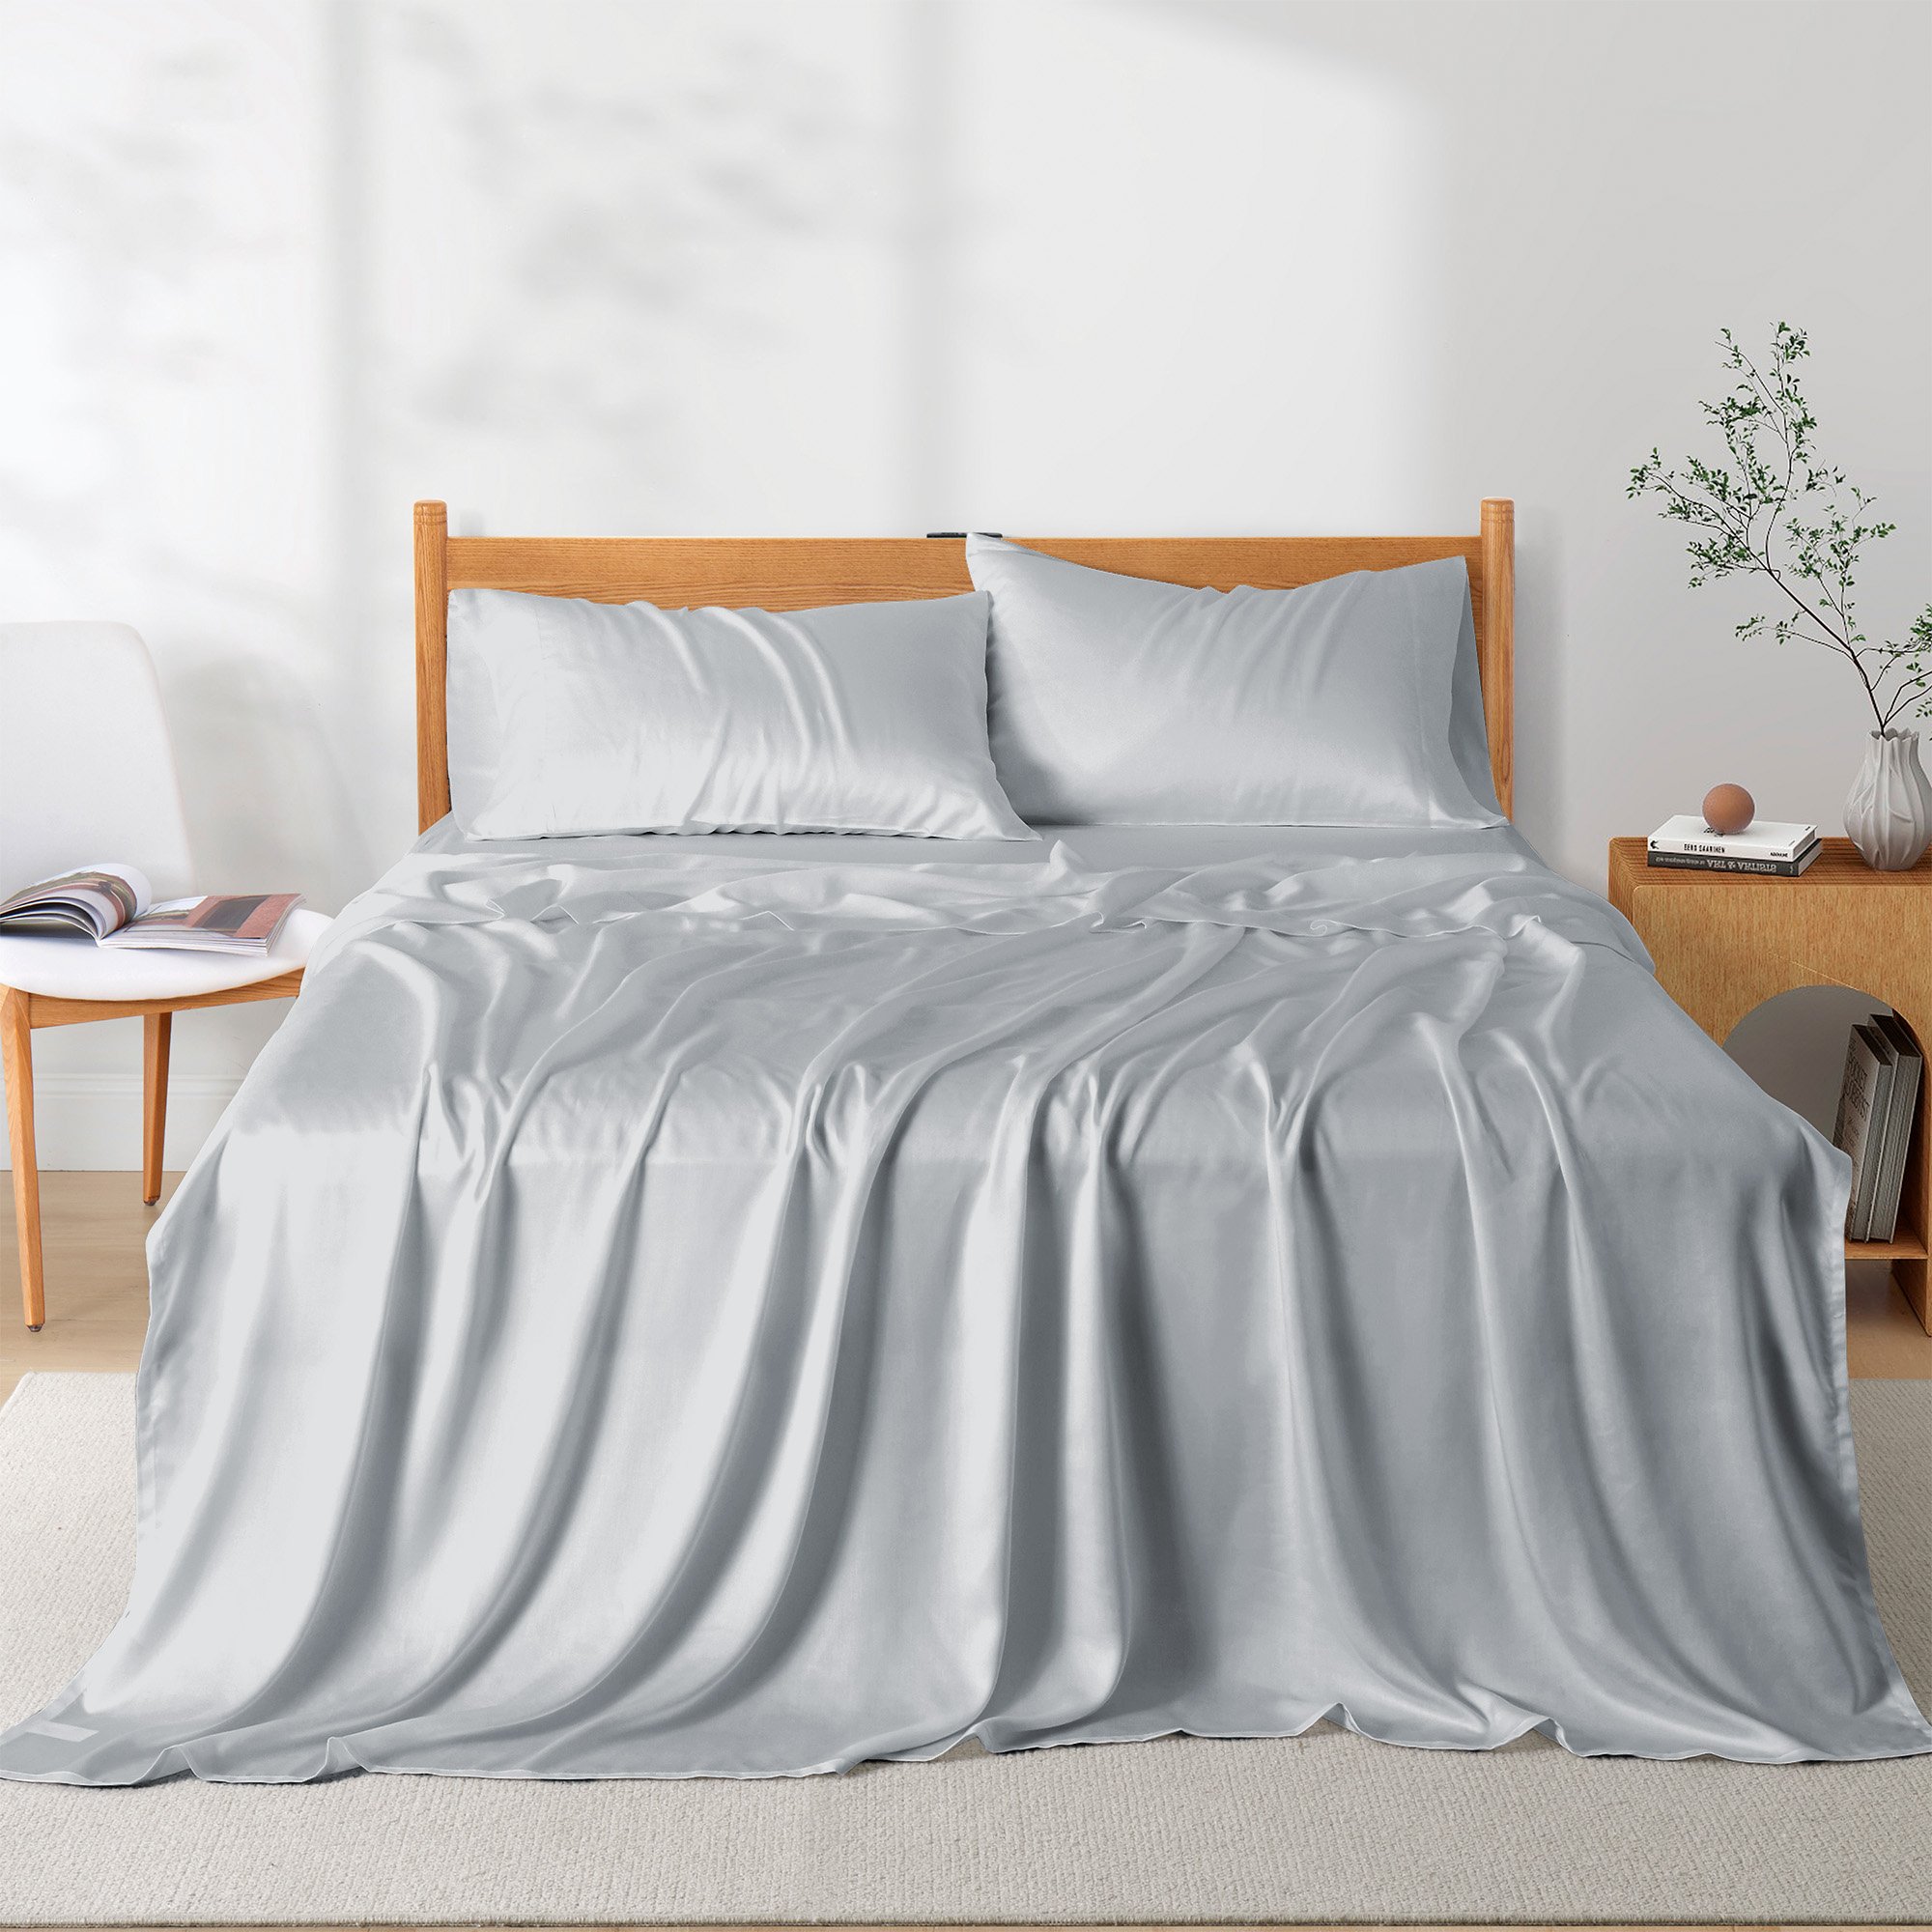 Premium Moisture-wicking Lyocell Tencel Sheet Set - 4pc - 2 Pillowcases 1 Fitted 1 Flat - Queen Size